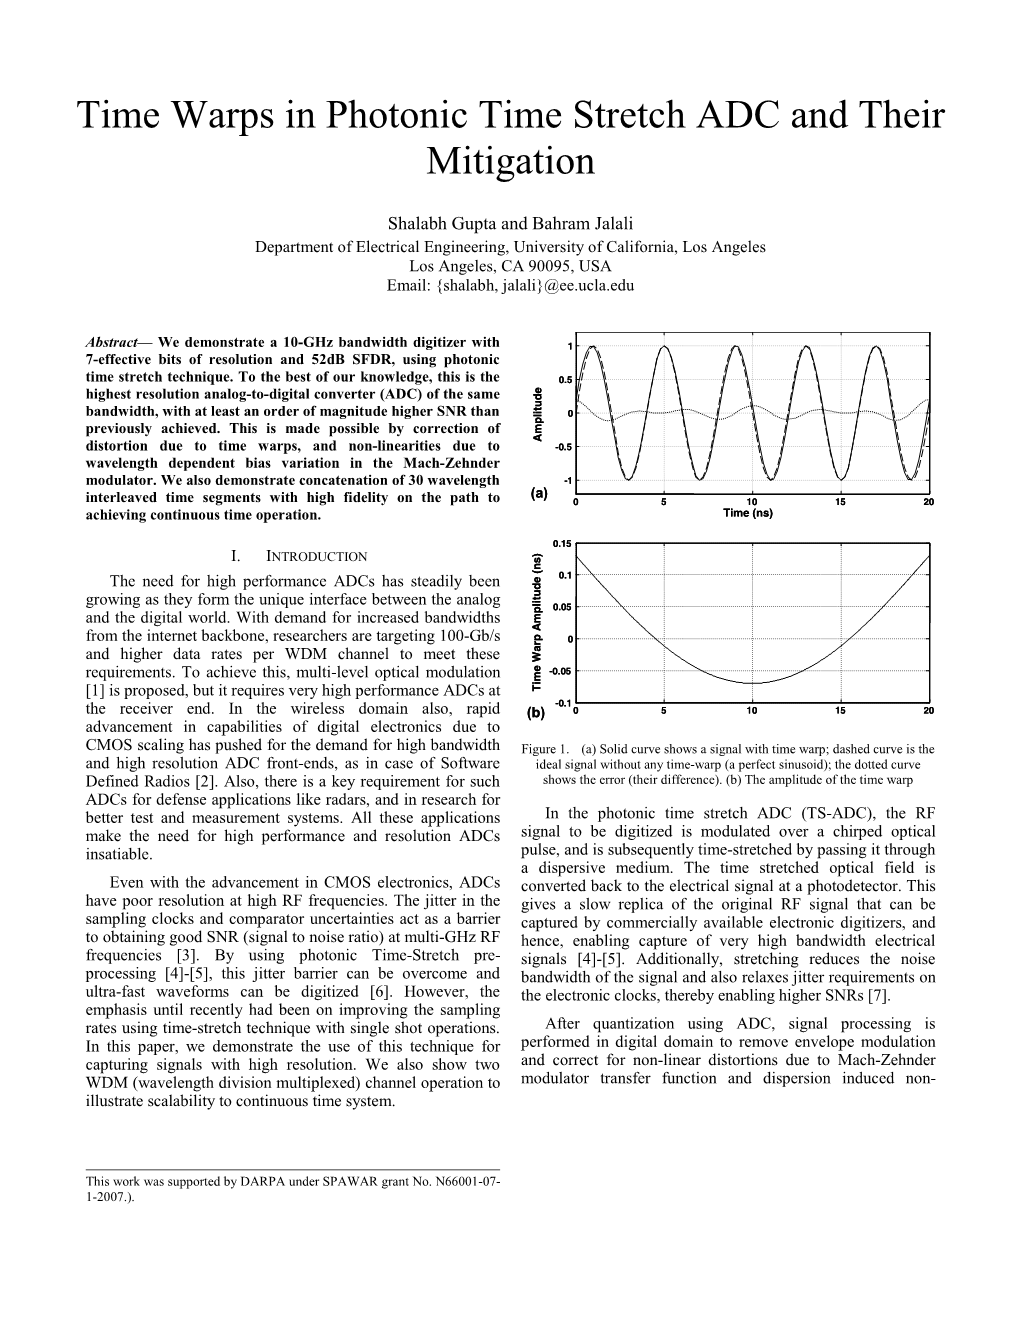 Time Warps in Photonic Time Stretch ADC and Their Mitigation